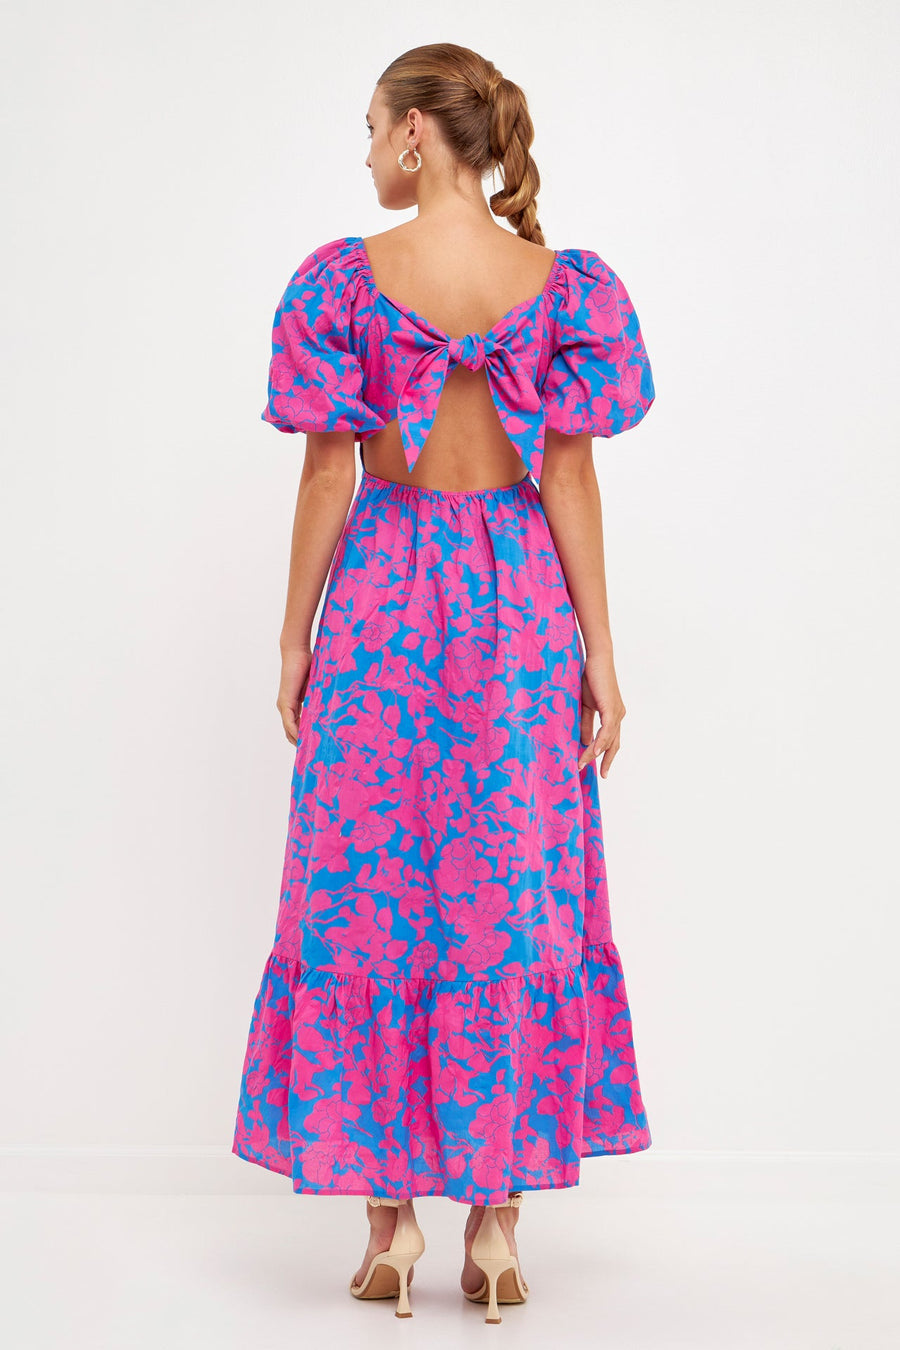 FREE THE ROSES-Floral Cut-Out Maxi Dress-DRESSES available at Objectrare